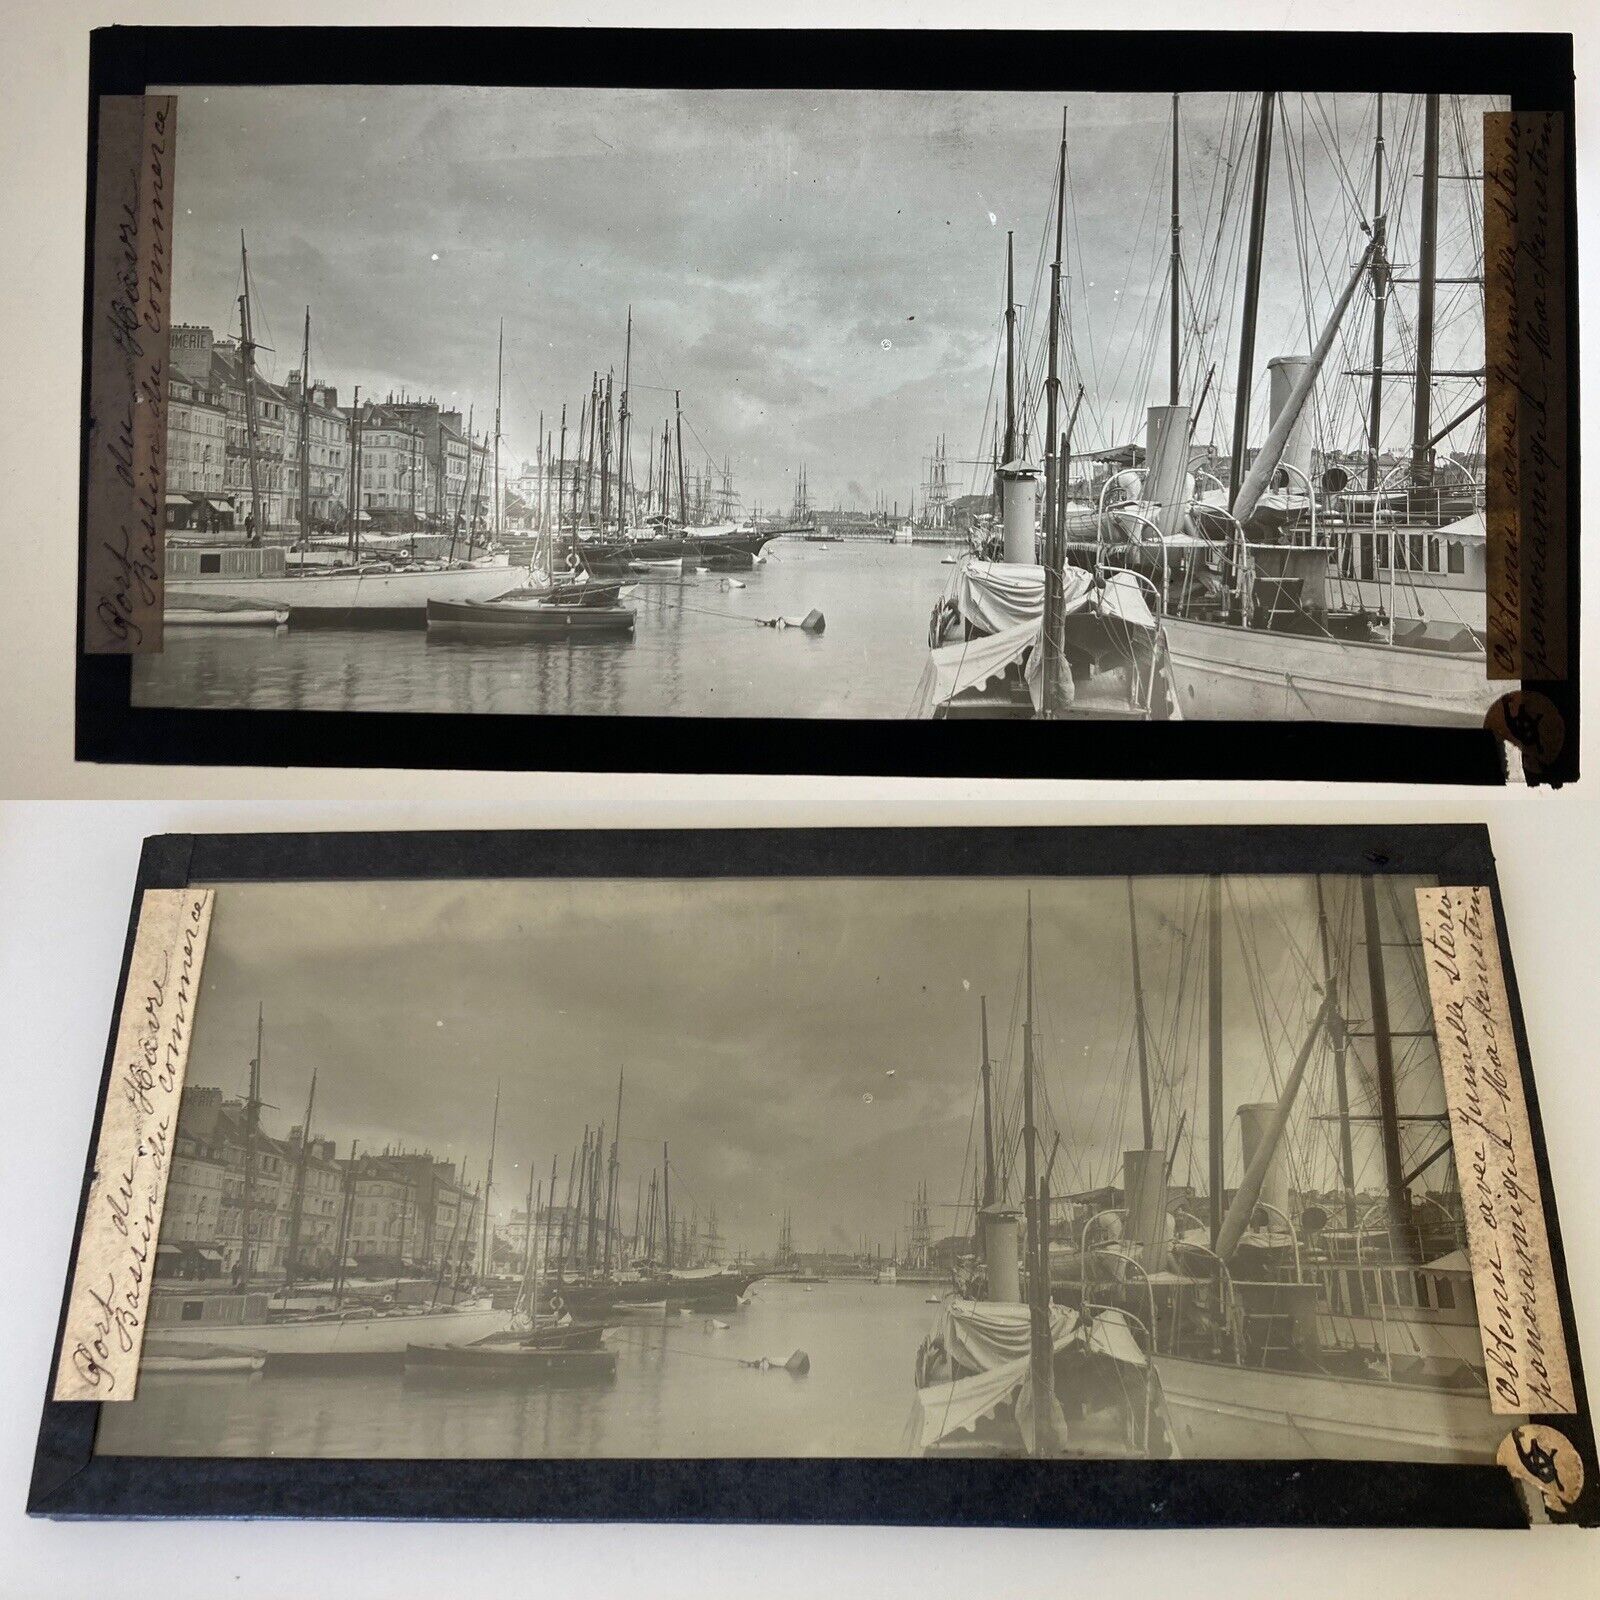 LE HAVRE 1899 PORT BASIN DU COMMERCE GLASS PLATE 8.5x17 PANORAMIC PHOTO VIEW